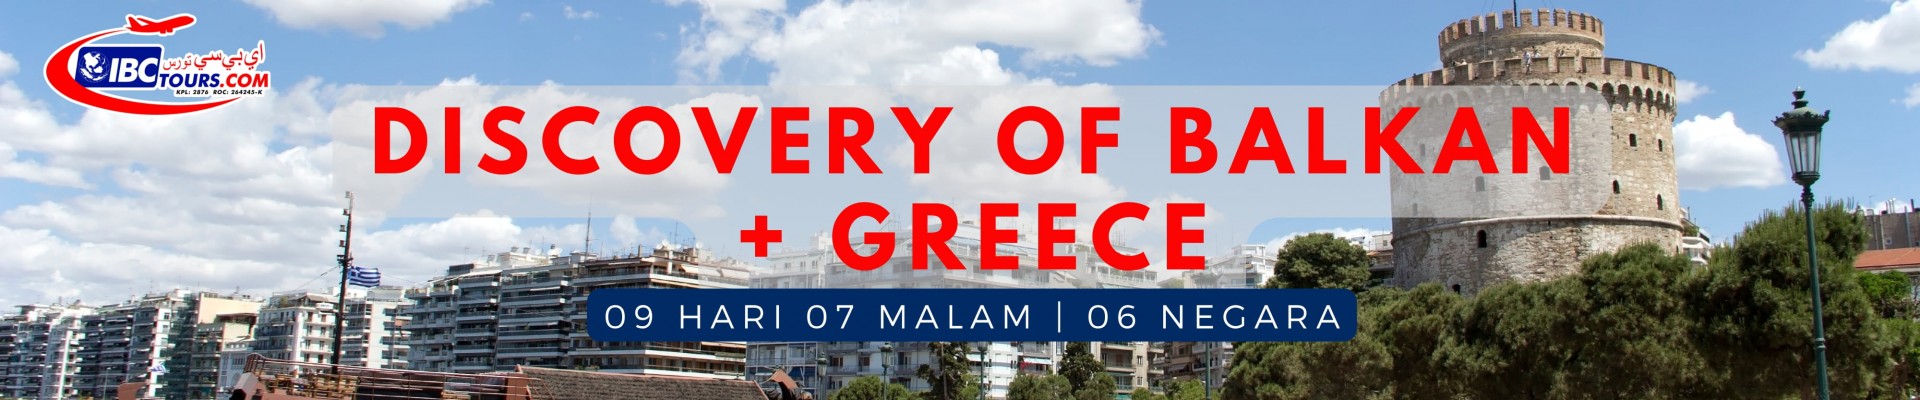 09 DAYS 07 NIGHTS DISCOVER 6 COUNTRIES BALKAN + GREECE 